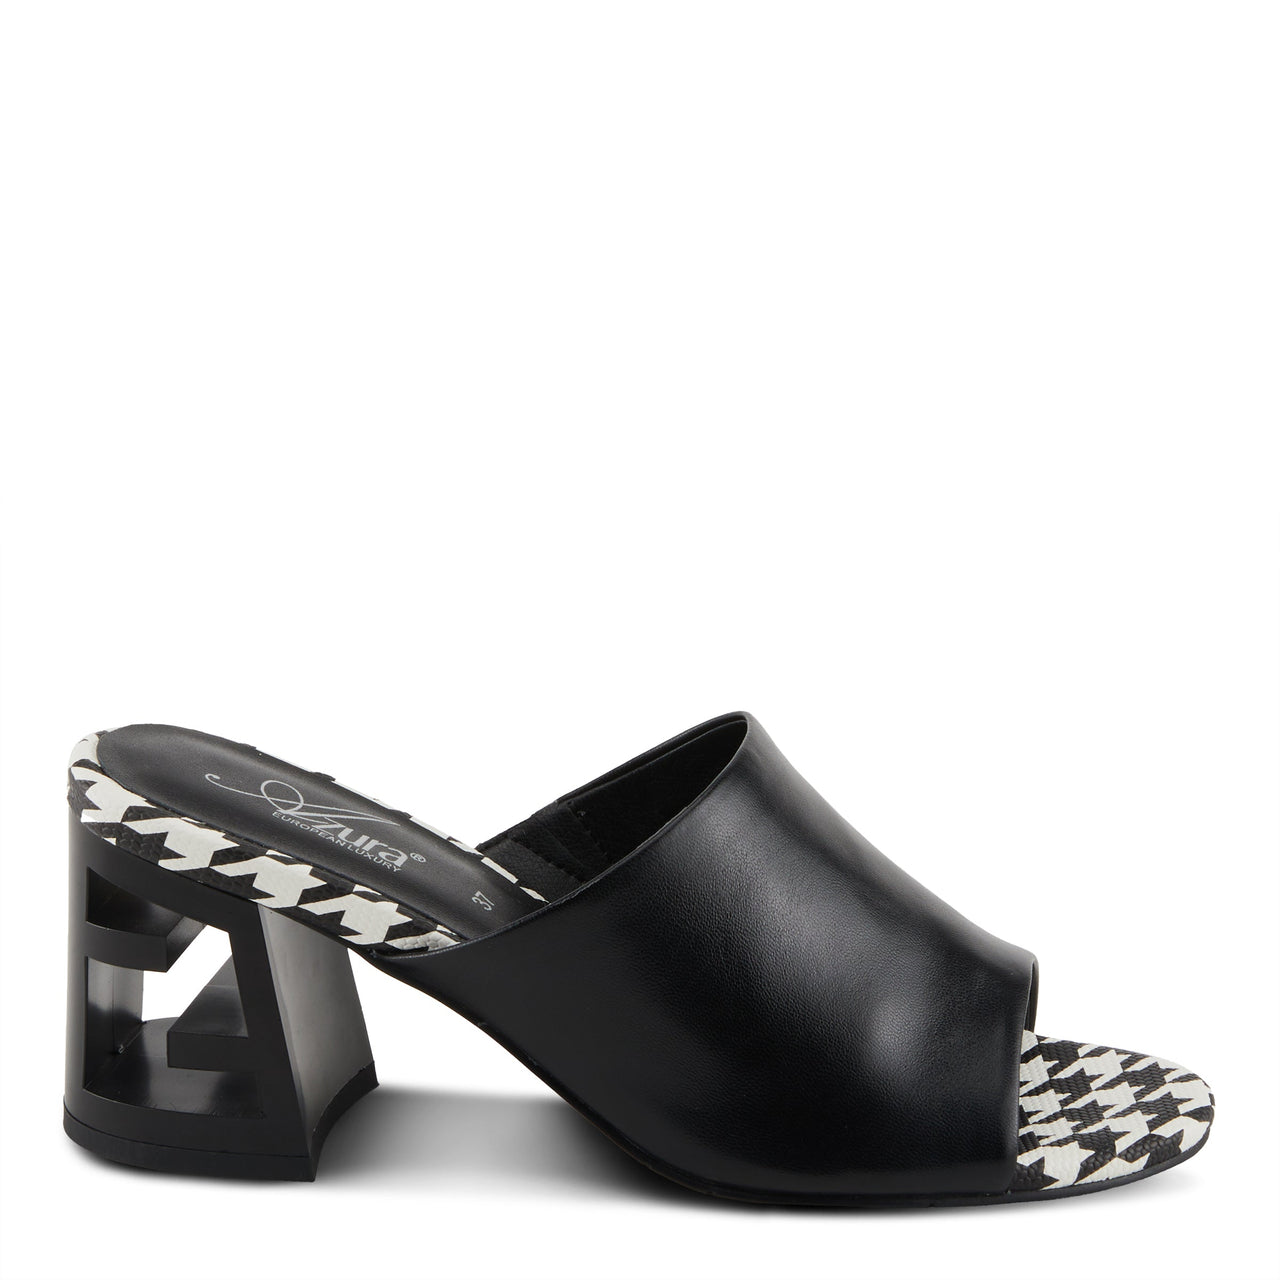  Spring Step Shoes Azura Sculptor Sandals with Soft Leather Lining